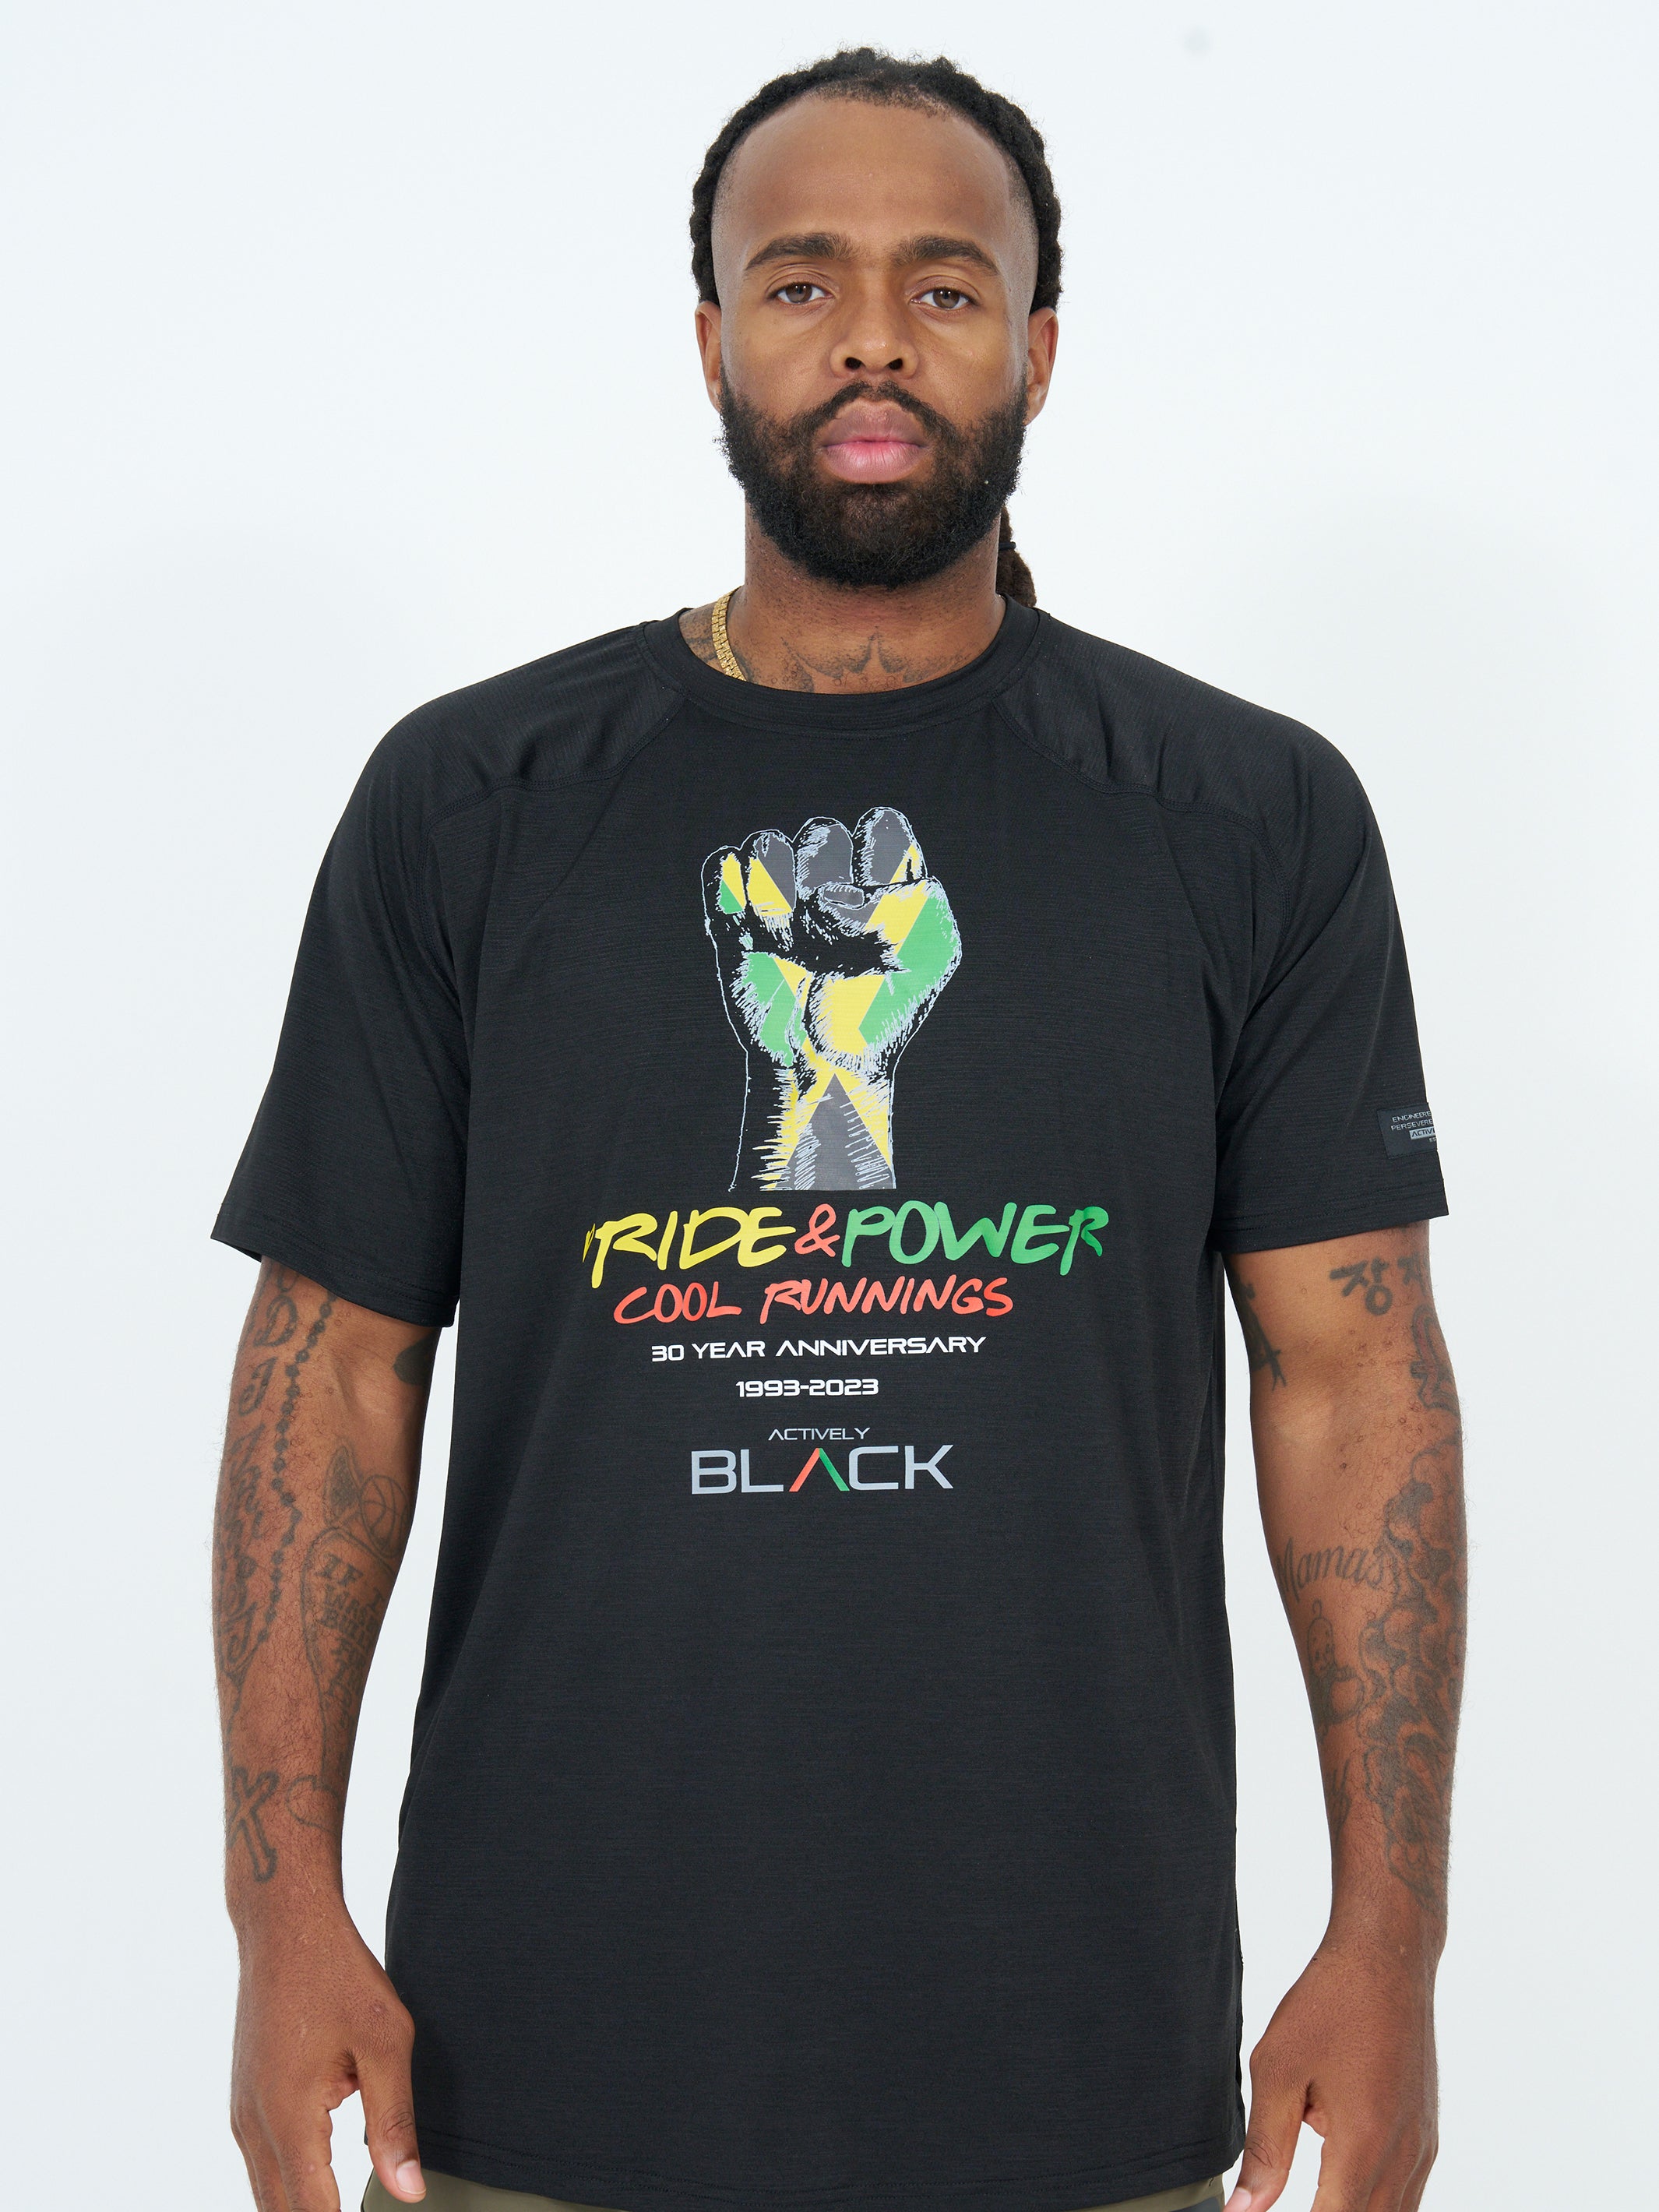 Actively Black Pride & Power Performance Shirt